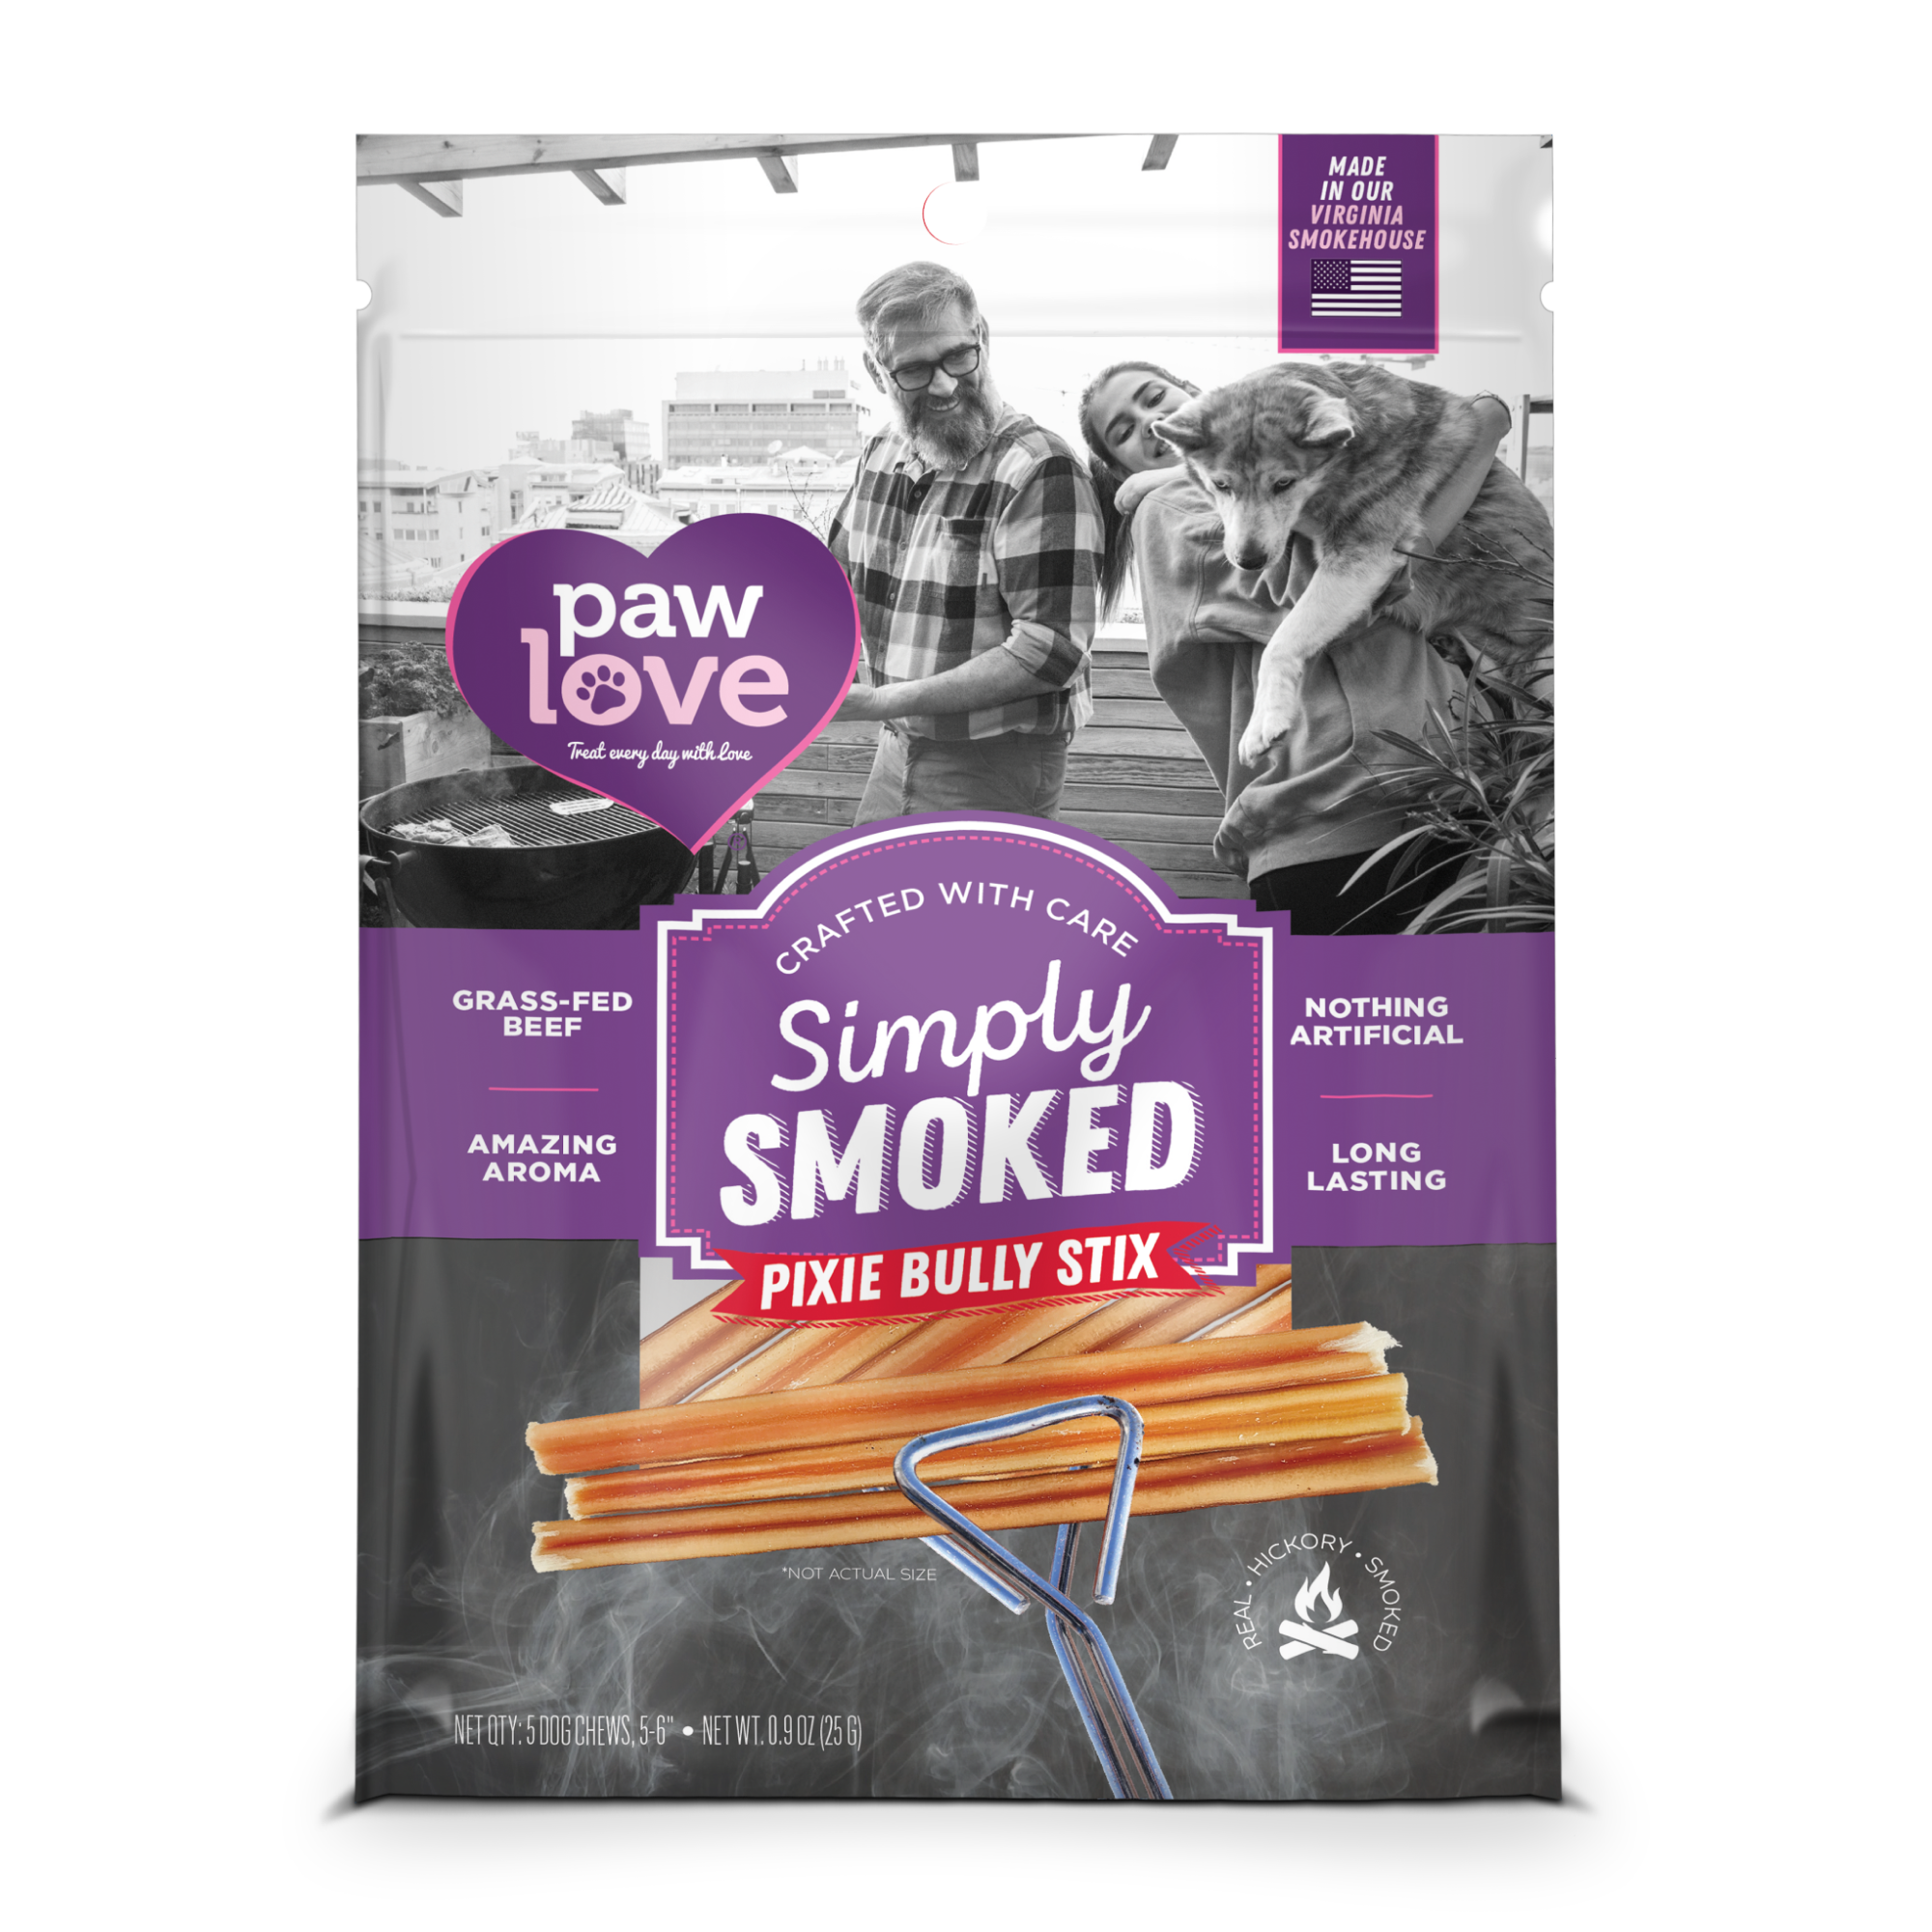 A package of Paw Love Simply Smoked Pixie Bully Stixs for dogs, featuring a black and white image of a man and woman in a kitchen, with color accents on product details.